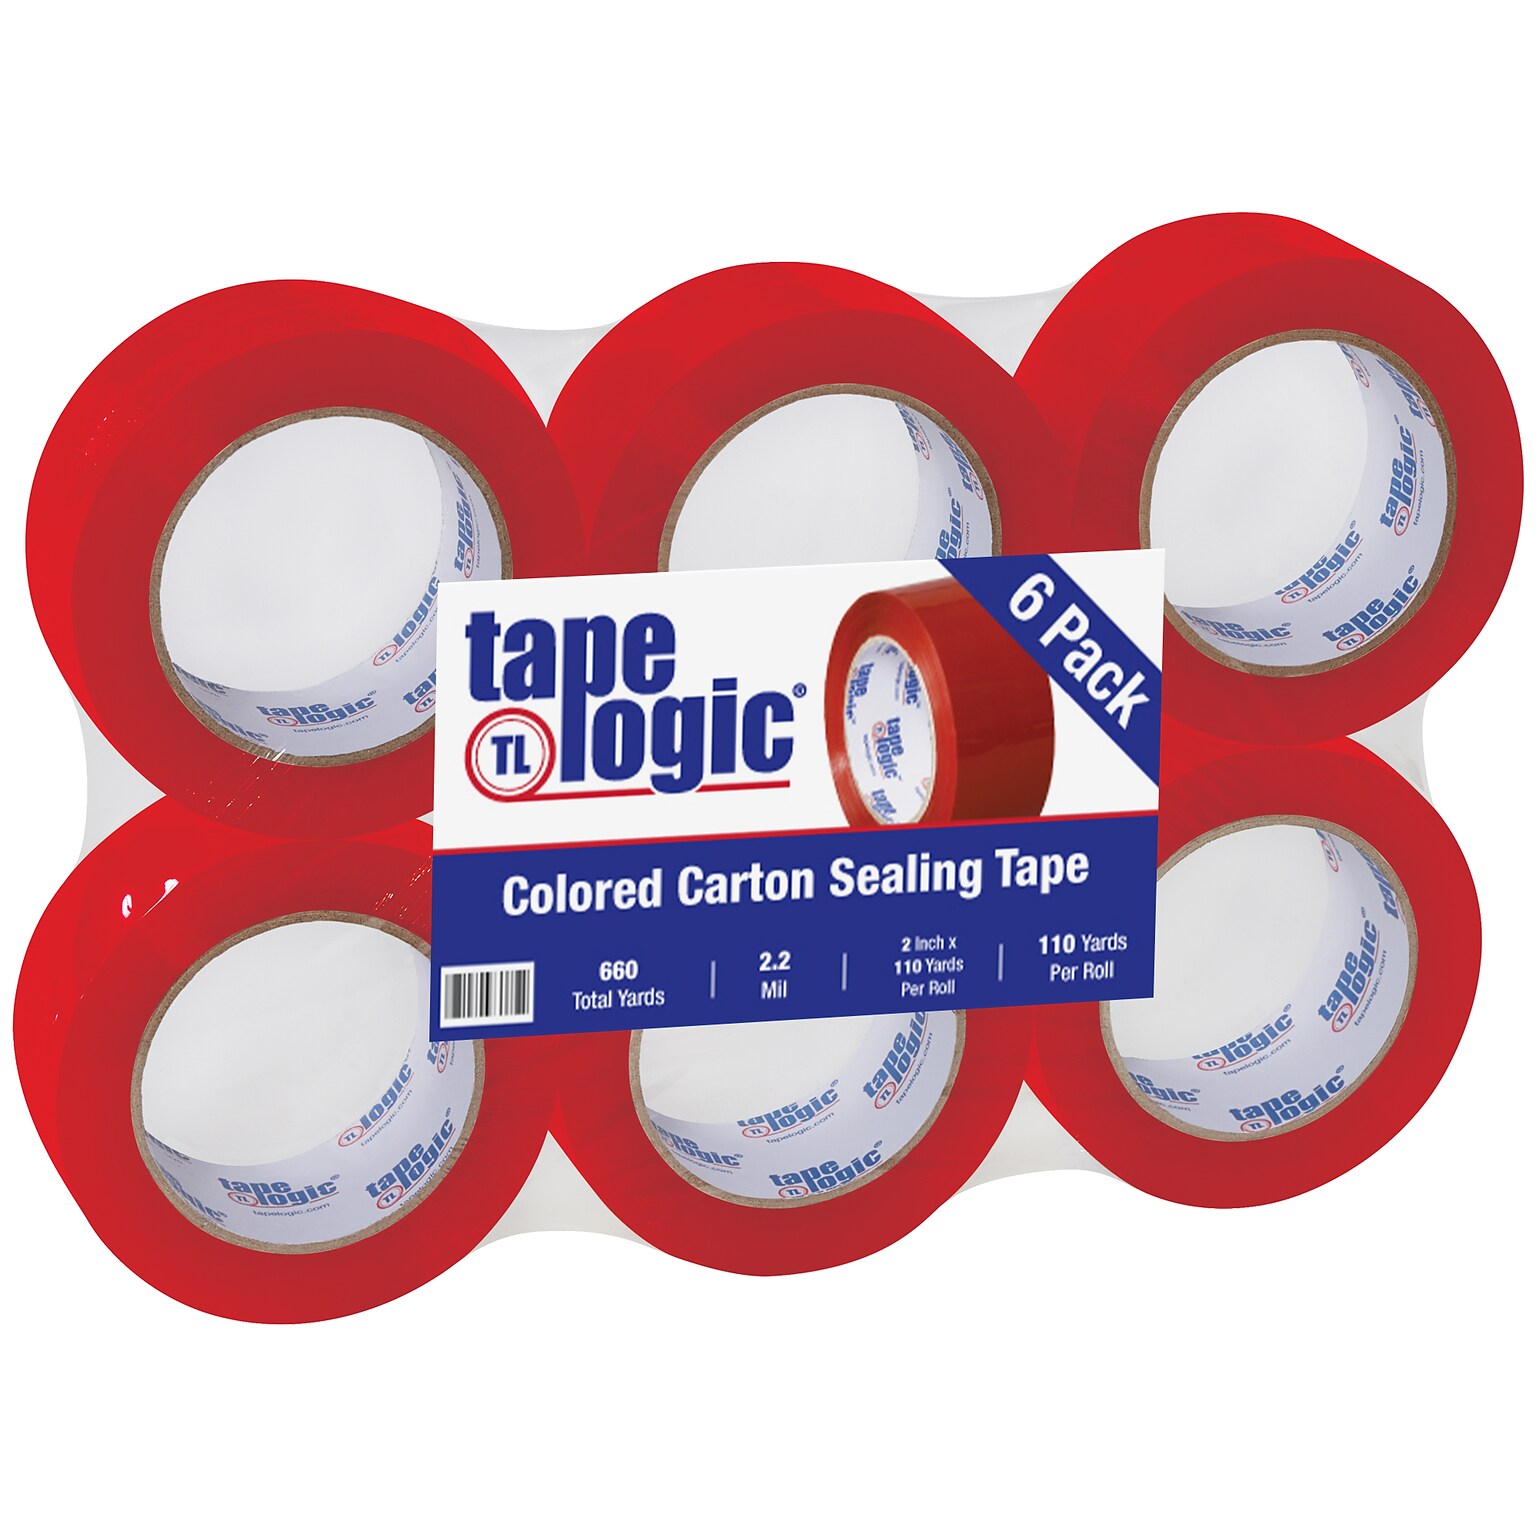 Tape Logic Colored Carton Sealing Heavy Duty Packing Tape, 2 x 110 yds., Red, 6/Carton (T90222R6PK)